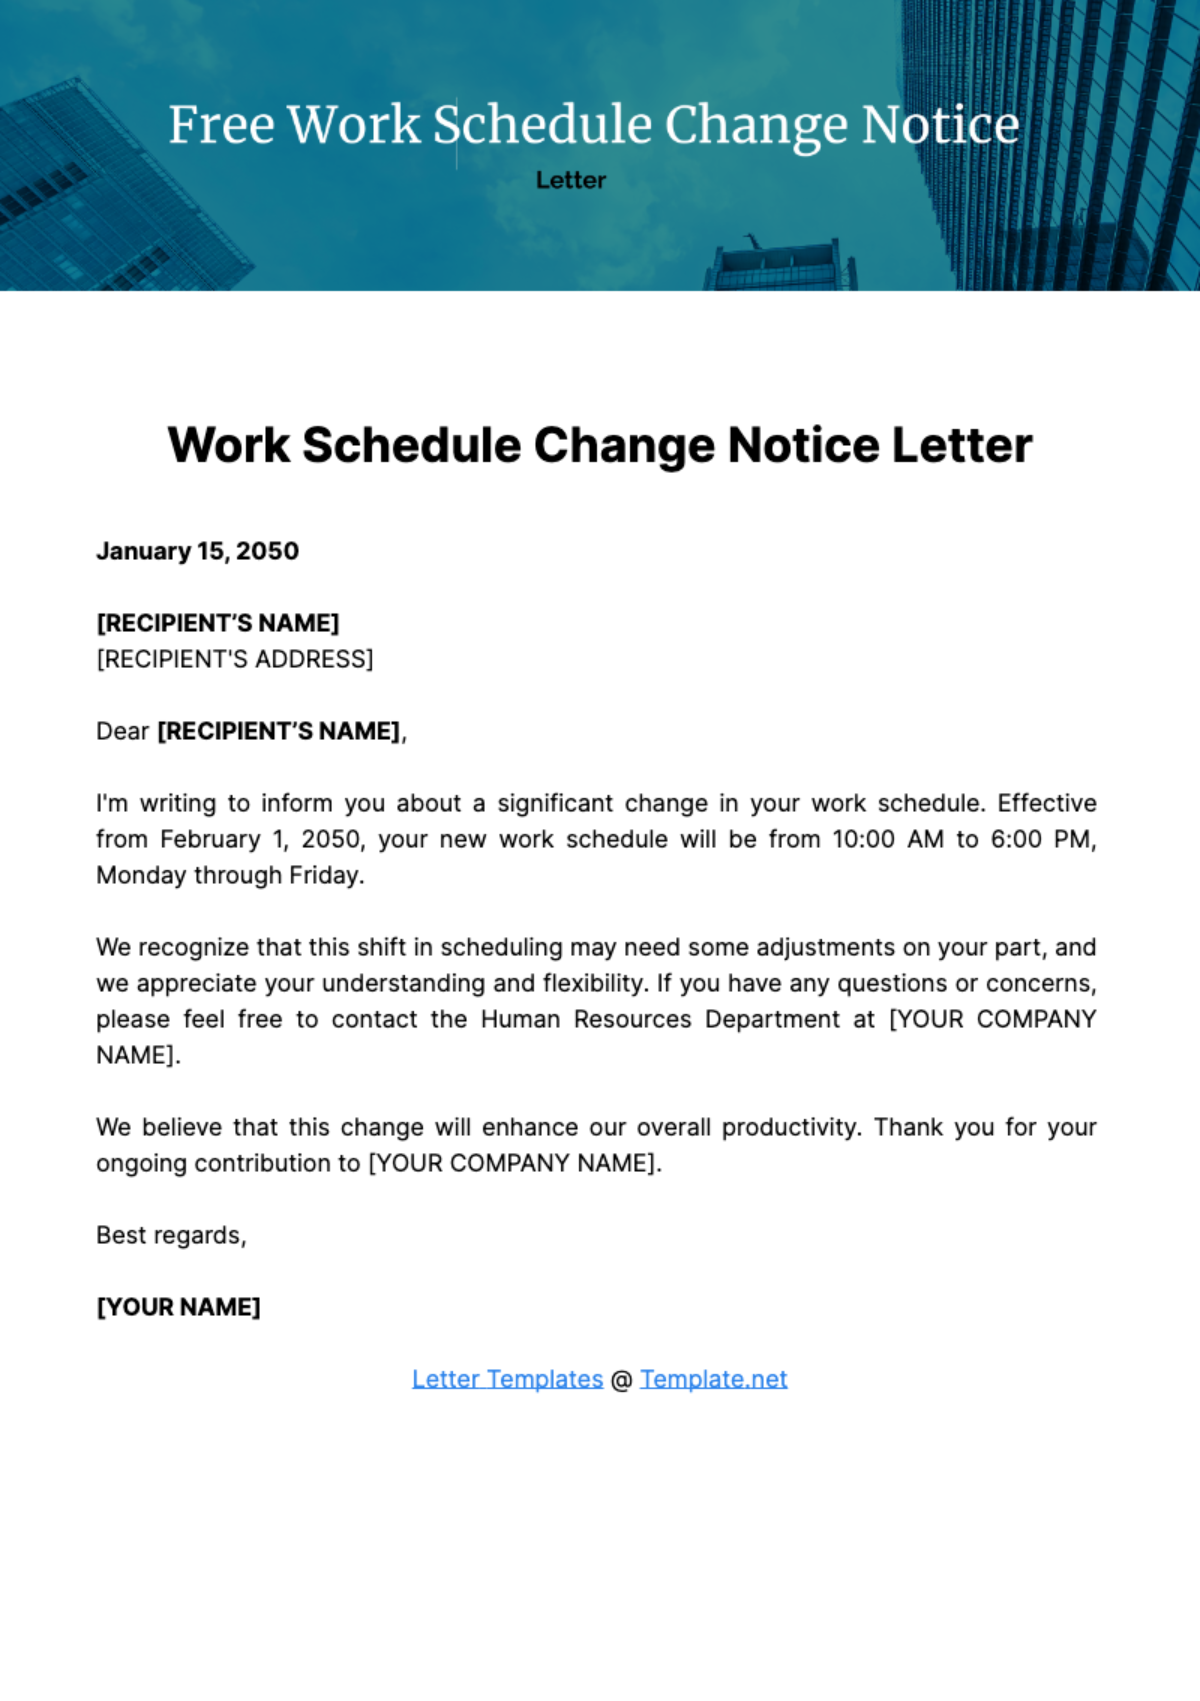 Free Work Schedule Change Notice Letter Template